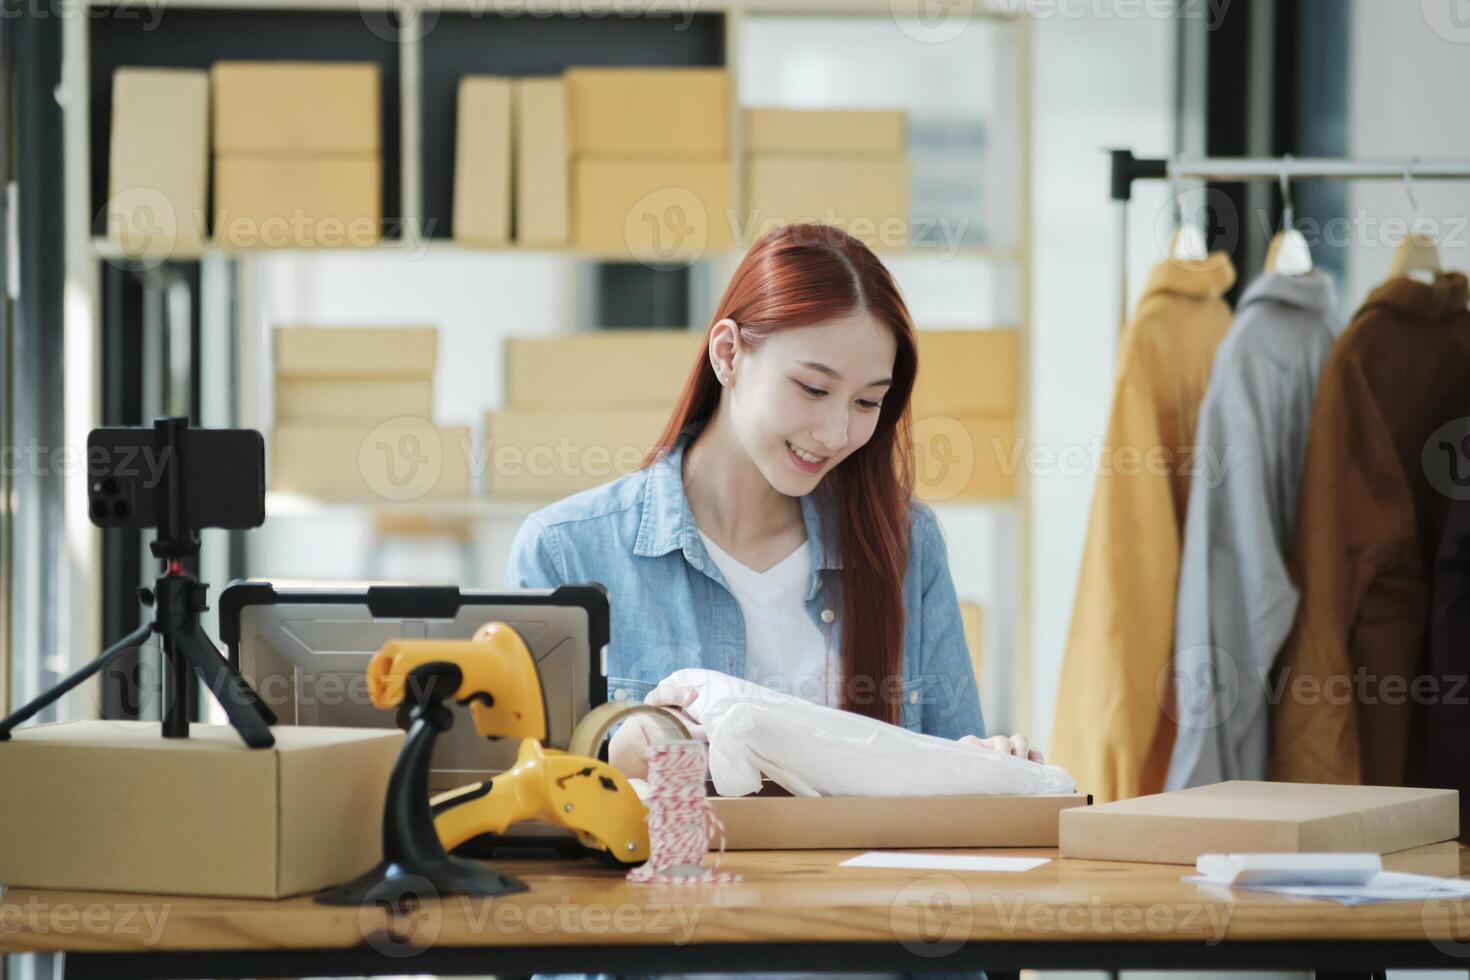 Small Business Owner Preparing Order for Shipment photo